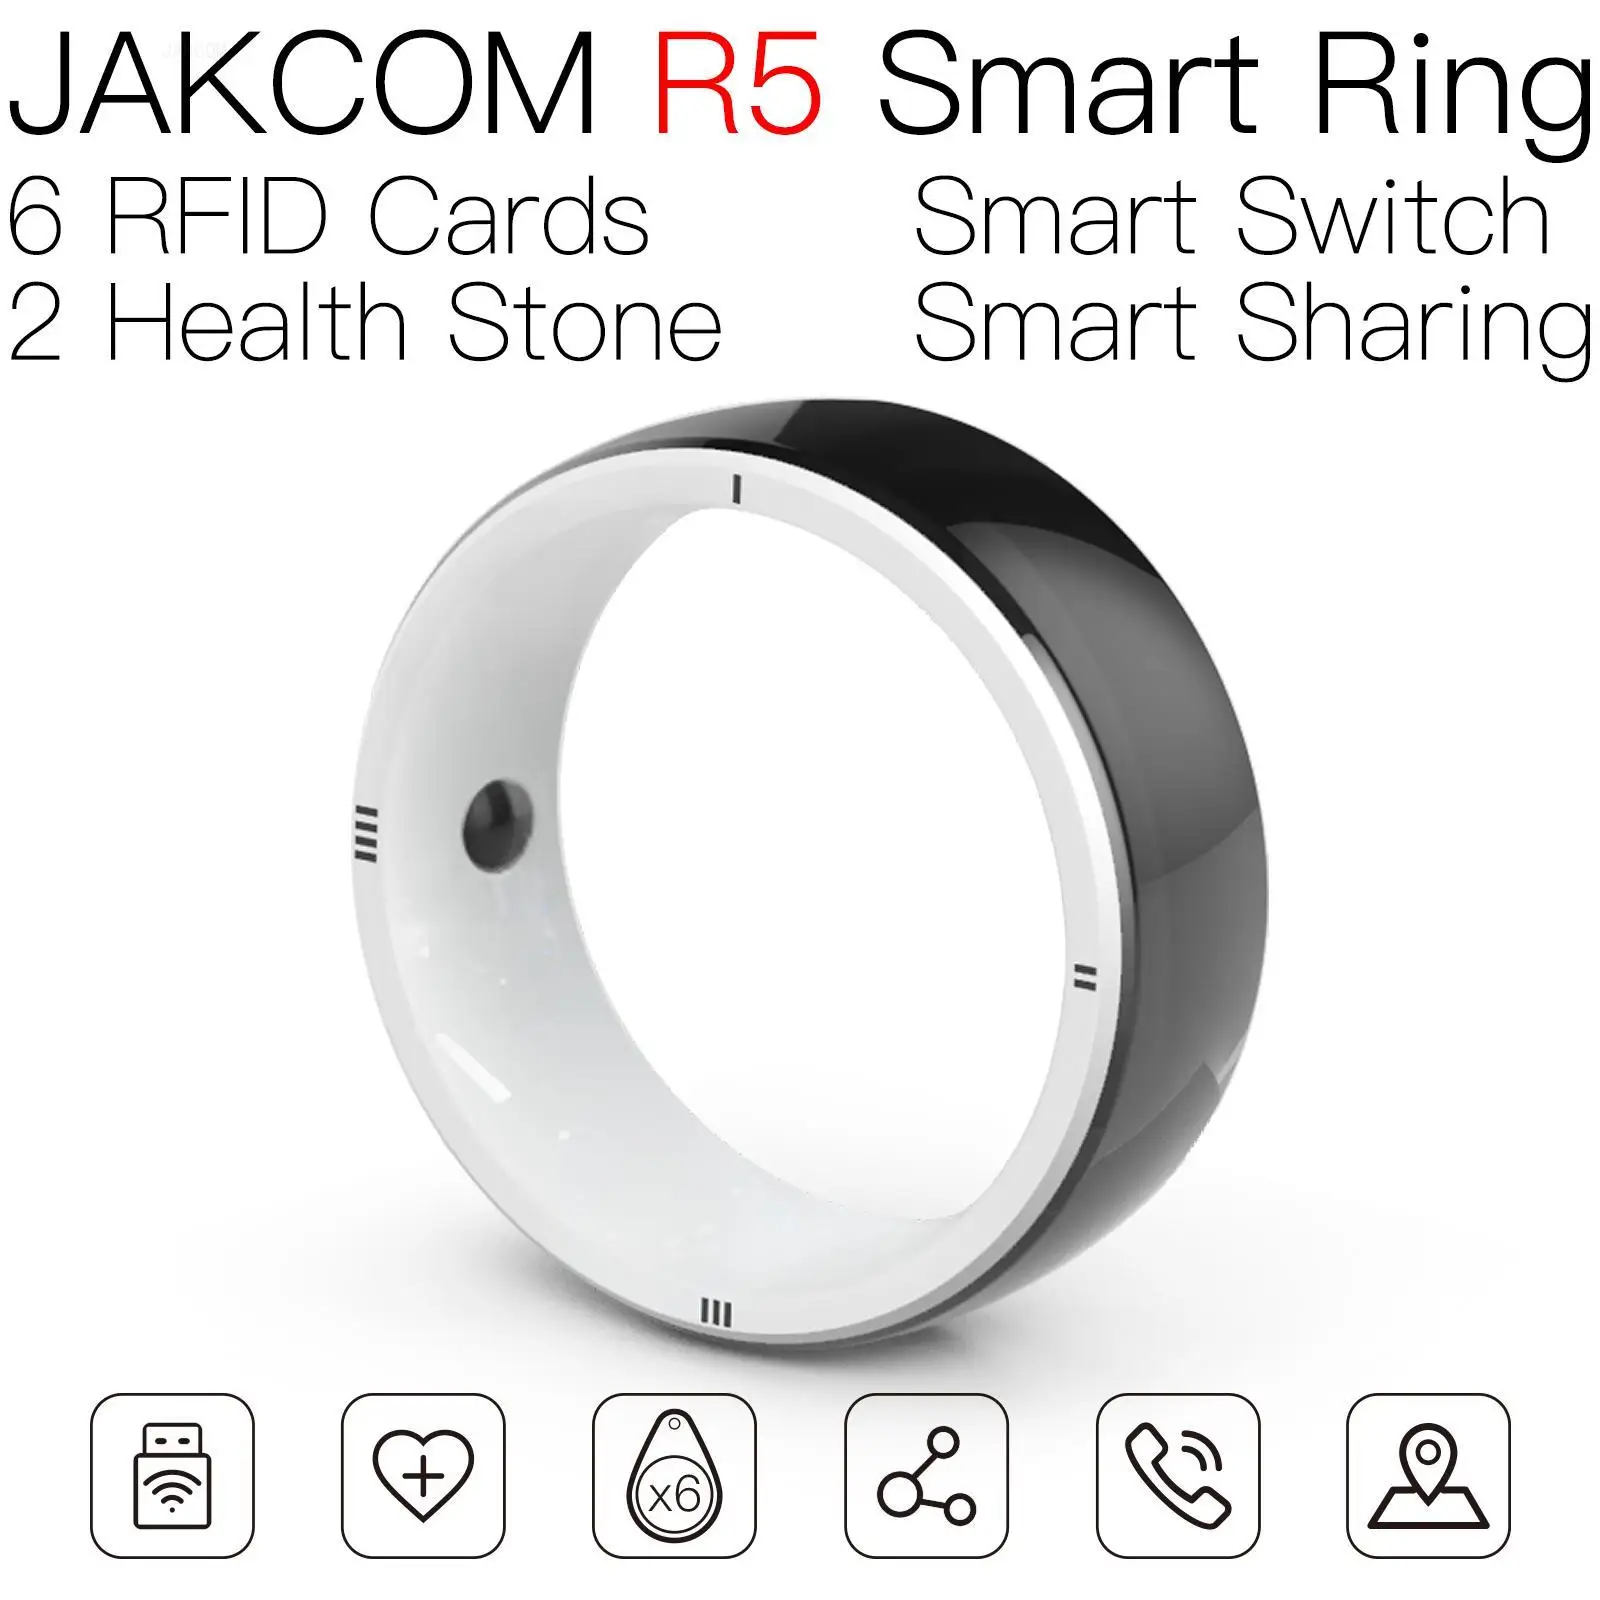 

JAKCOM R5 Smart Ring better than new user deal with free shipping fk78 smartwatch smart watch waterproof smartphone i14 max